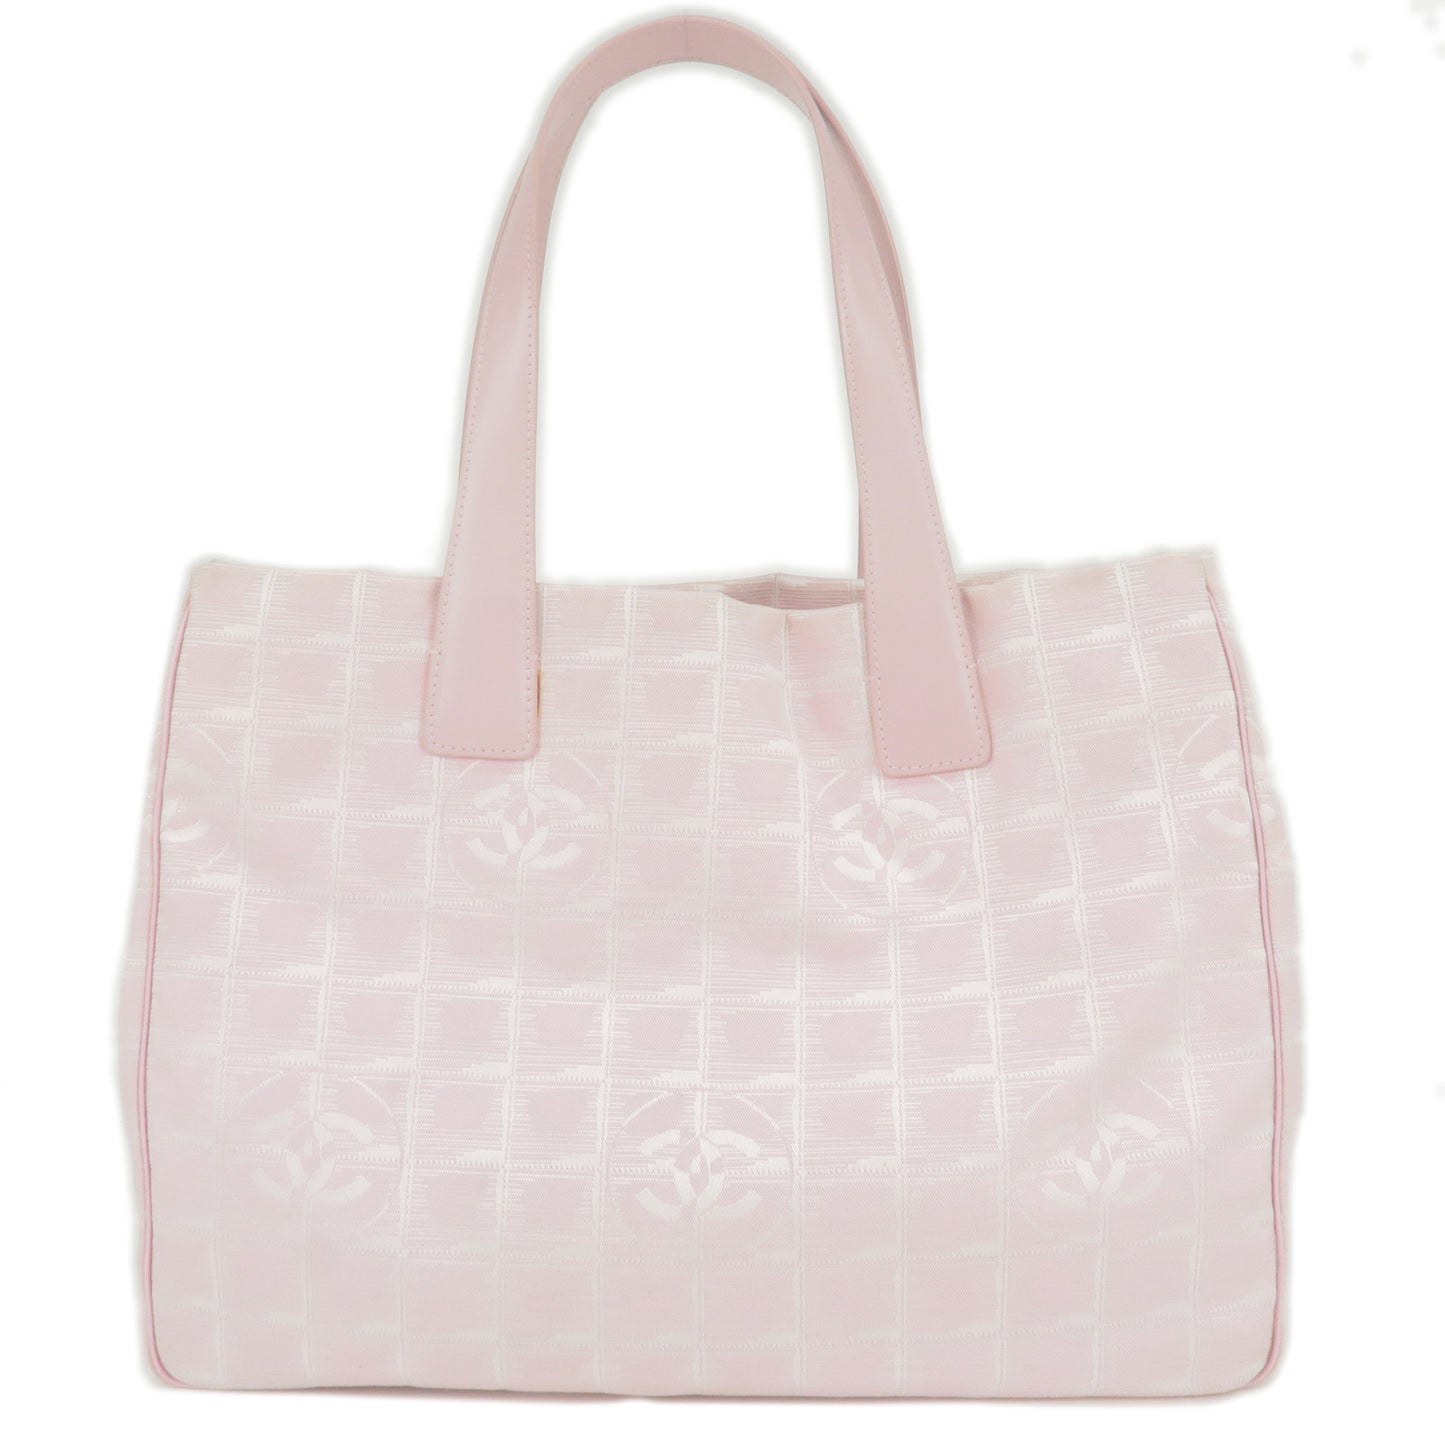 CHANEL-Travel-Line-Nylon-Jacquard-Leather-Tote-Bag-Pink-A15991